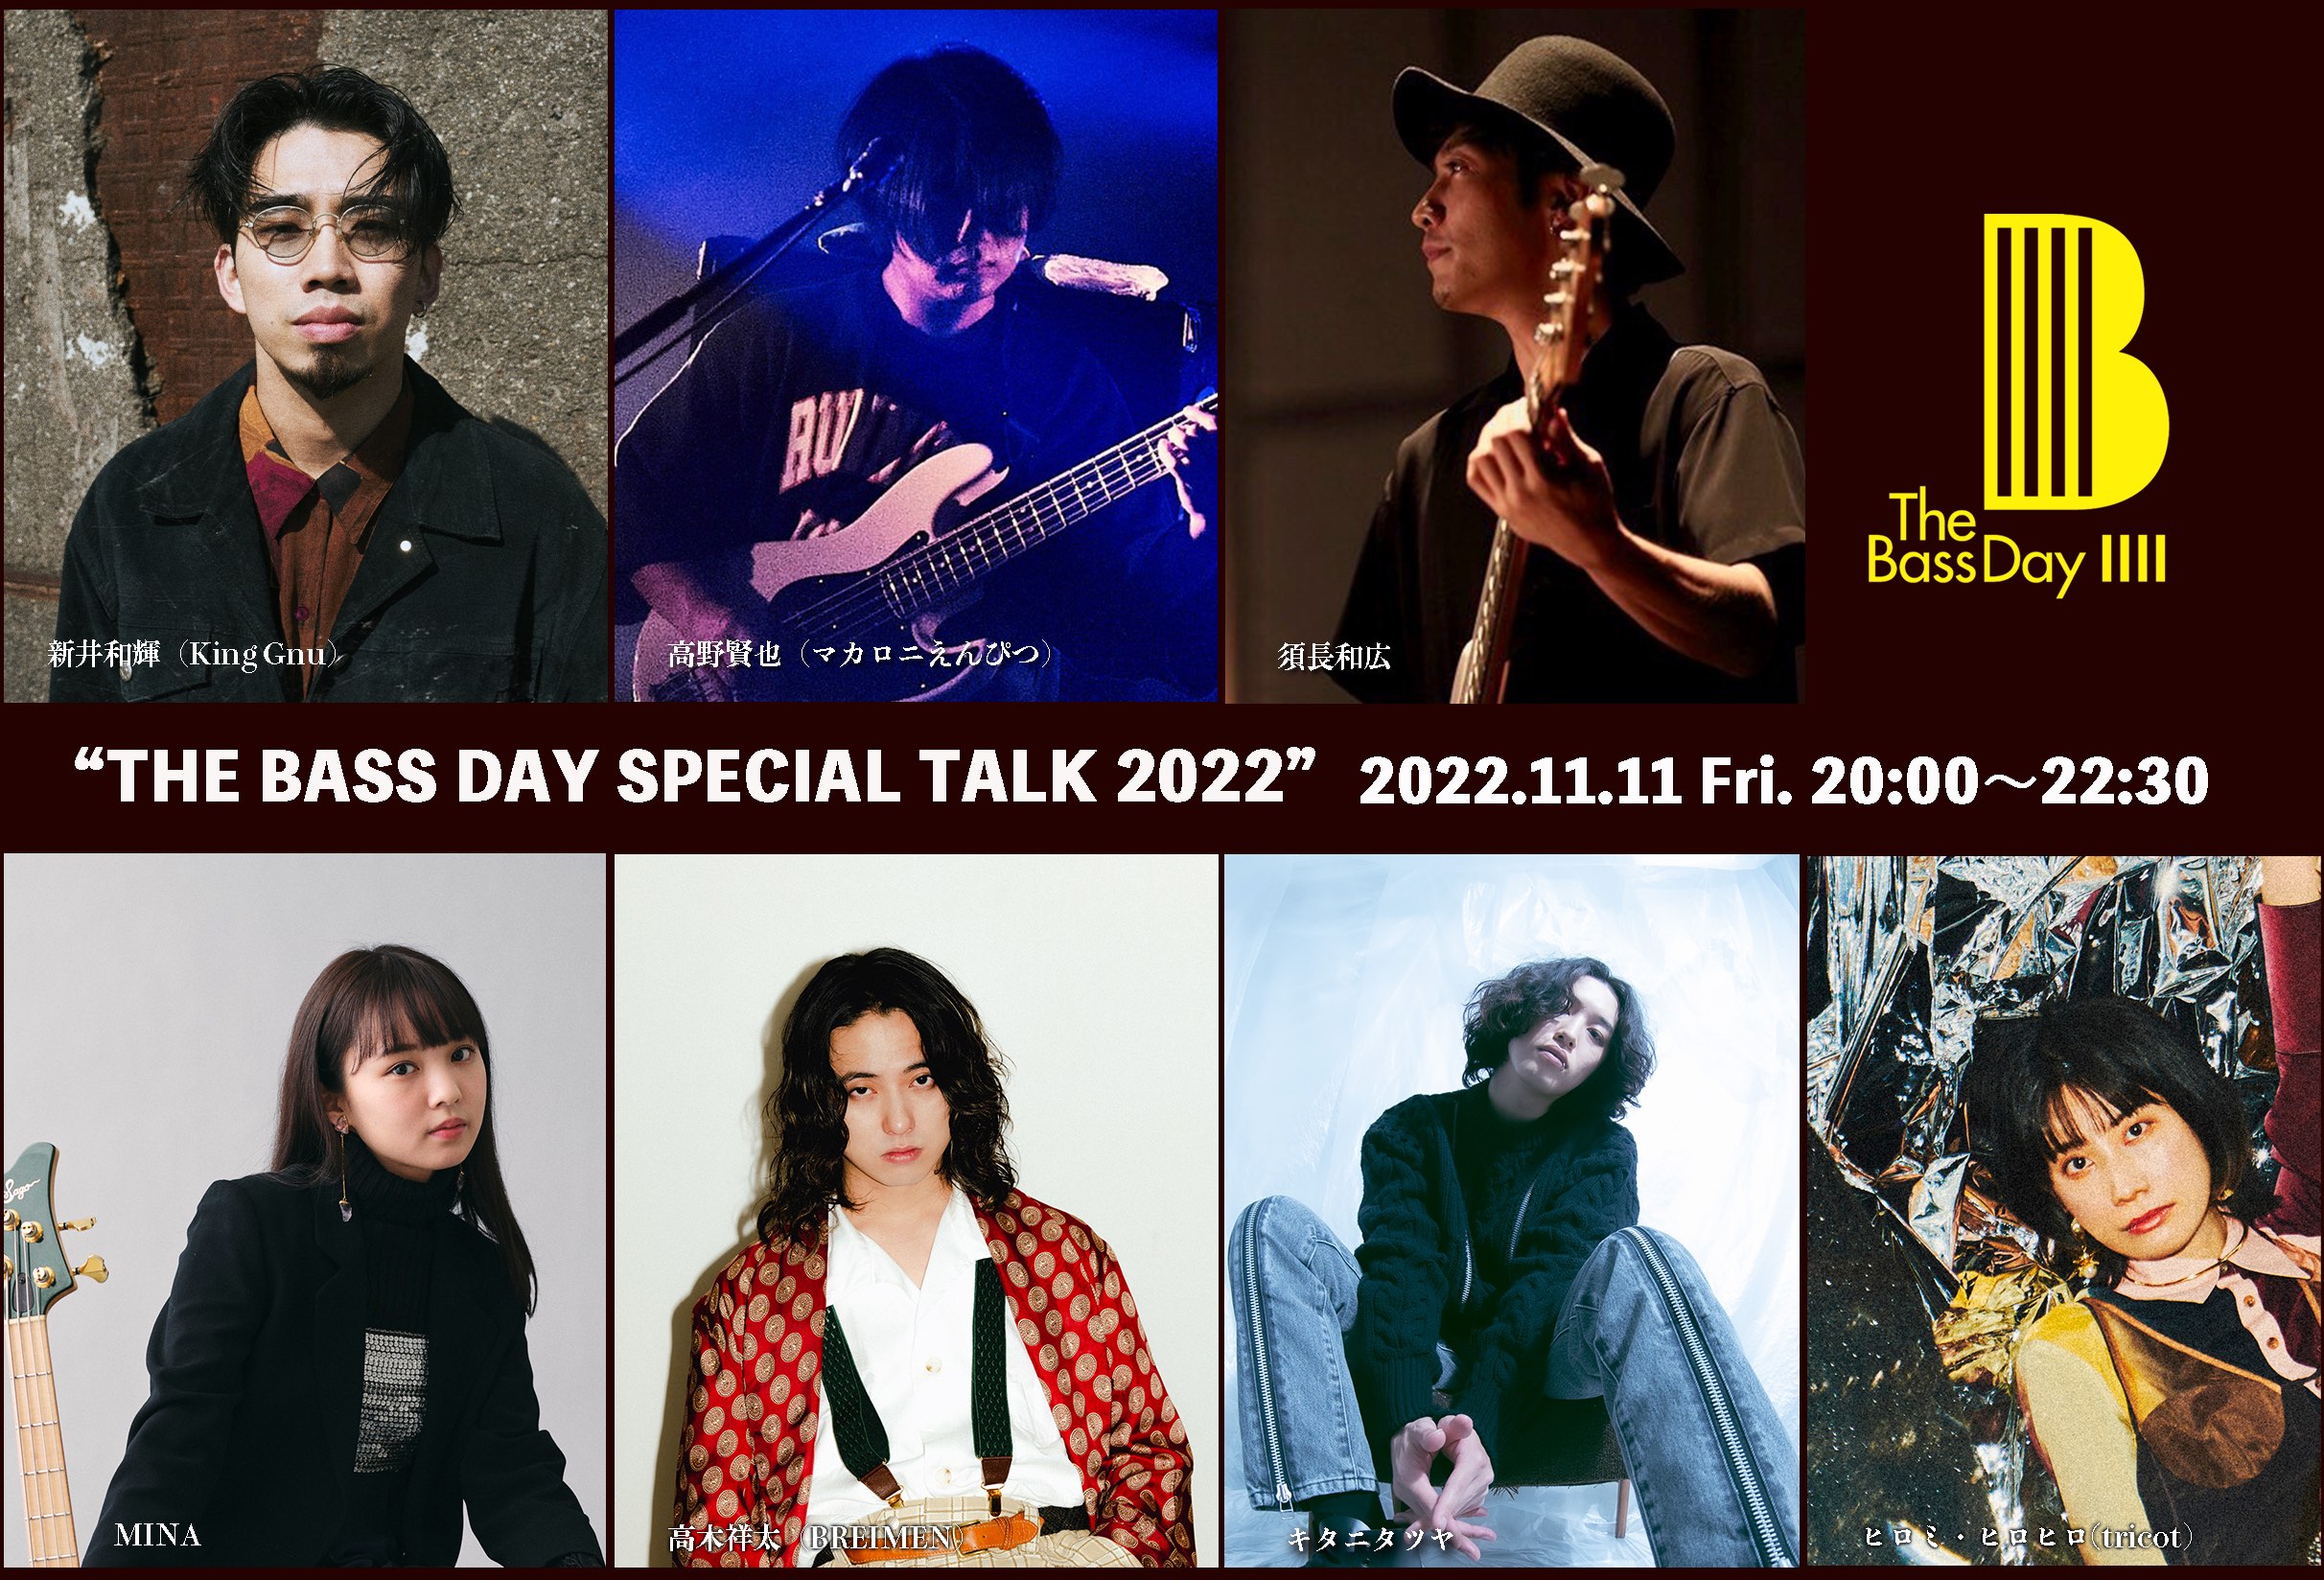 “THE BASS DAY SPECIAL TALK 2022 @YOUTUBE &J-WAVE”ベース尽くしの１DAY企画が決定！！